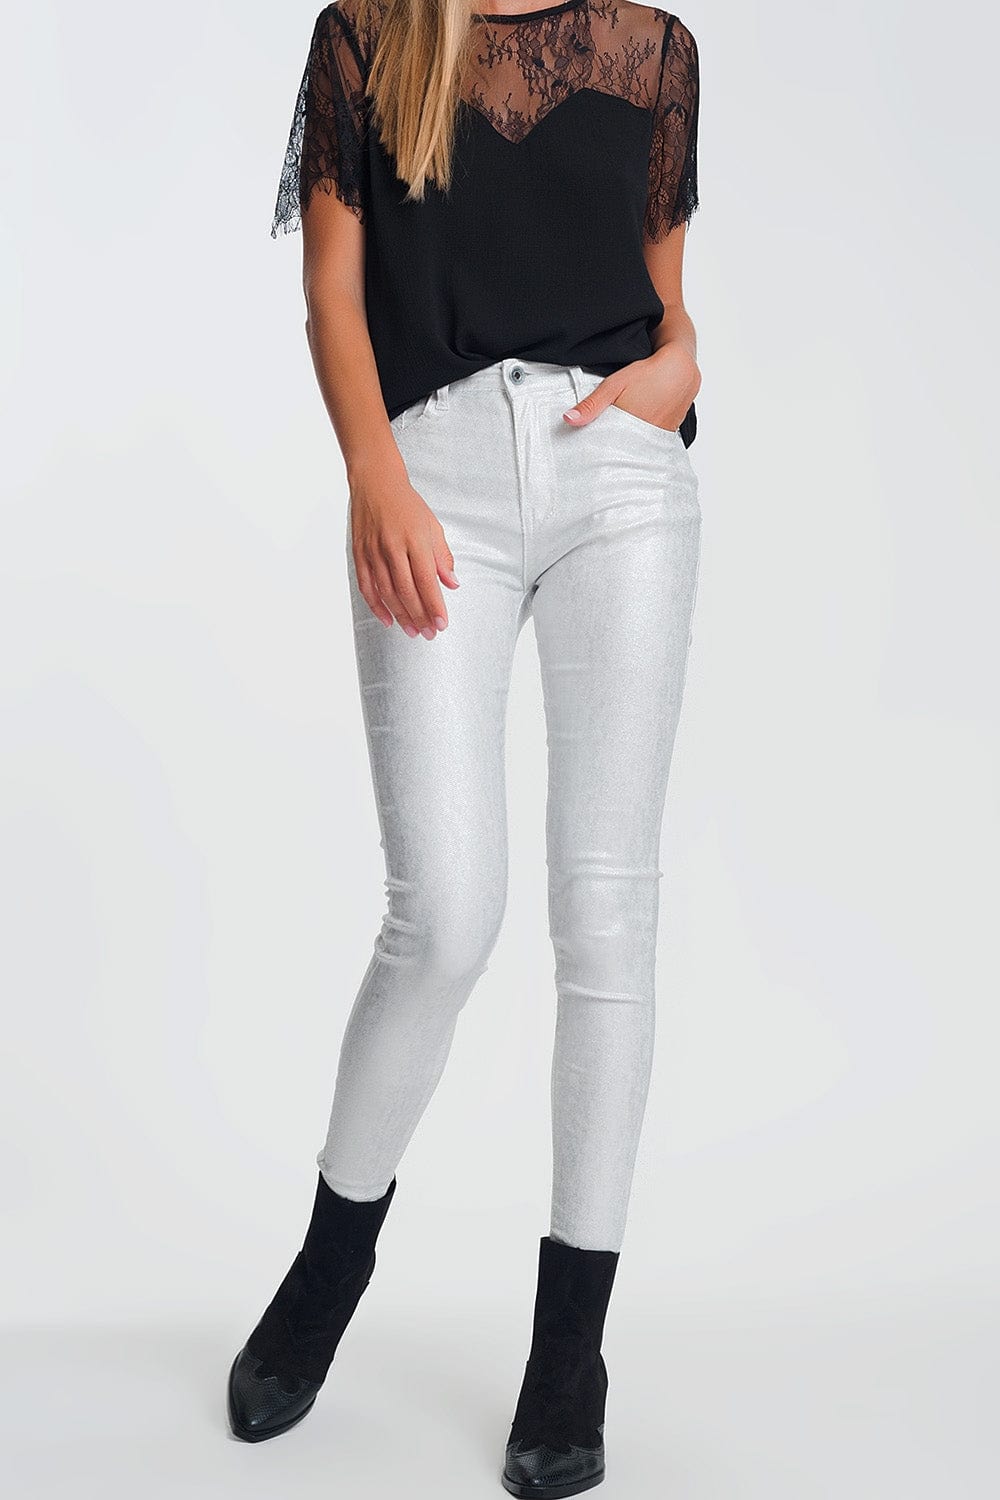 Q2 Pants Super skinny high waisted Pants with silver sparkle in white